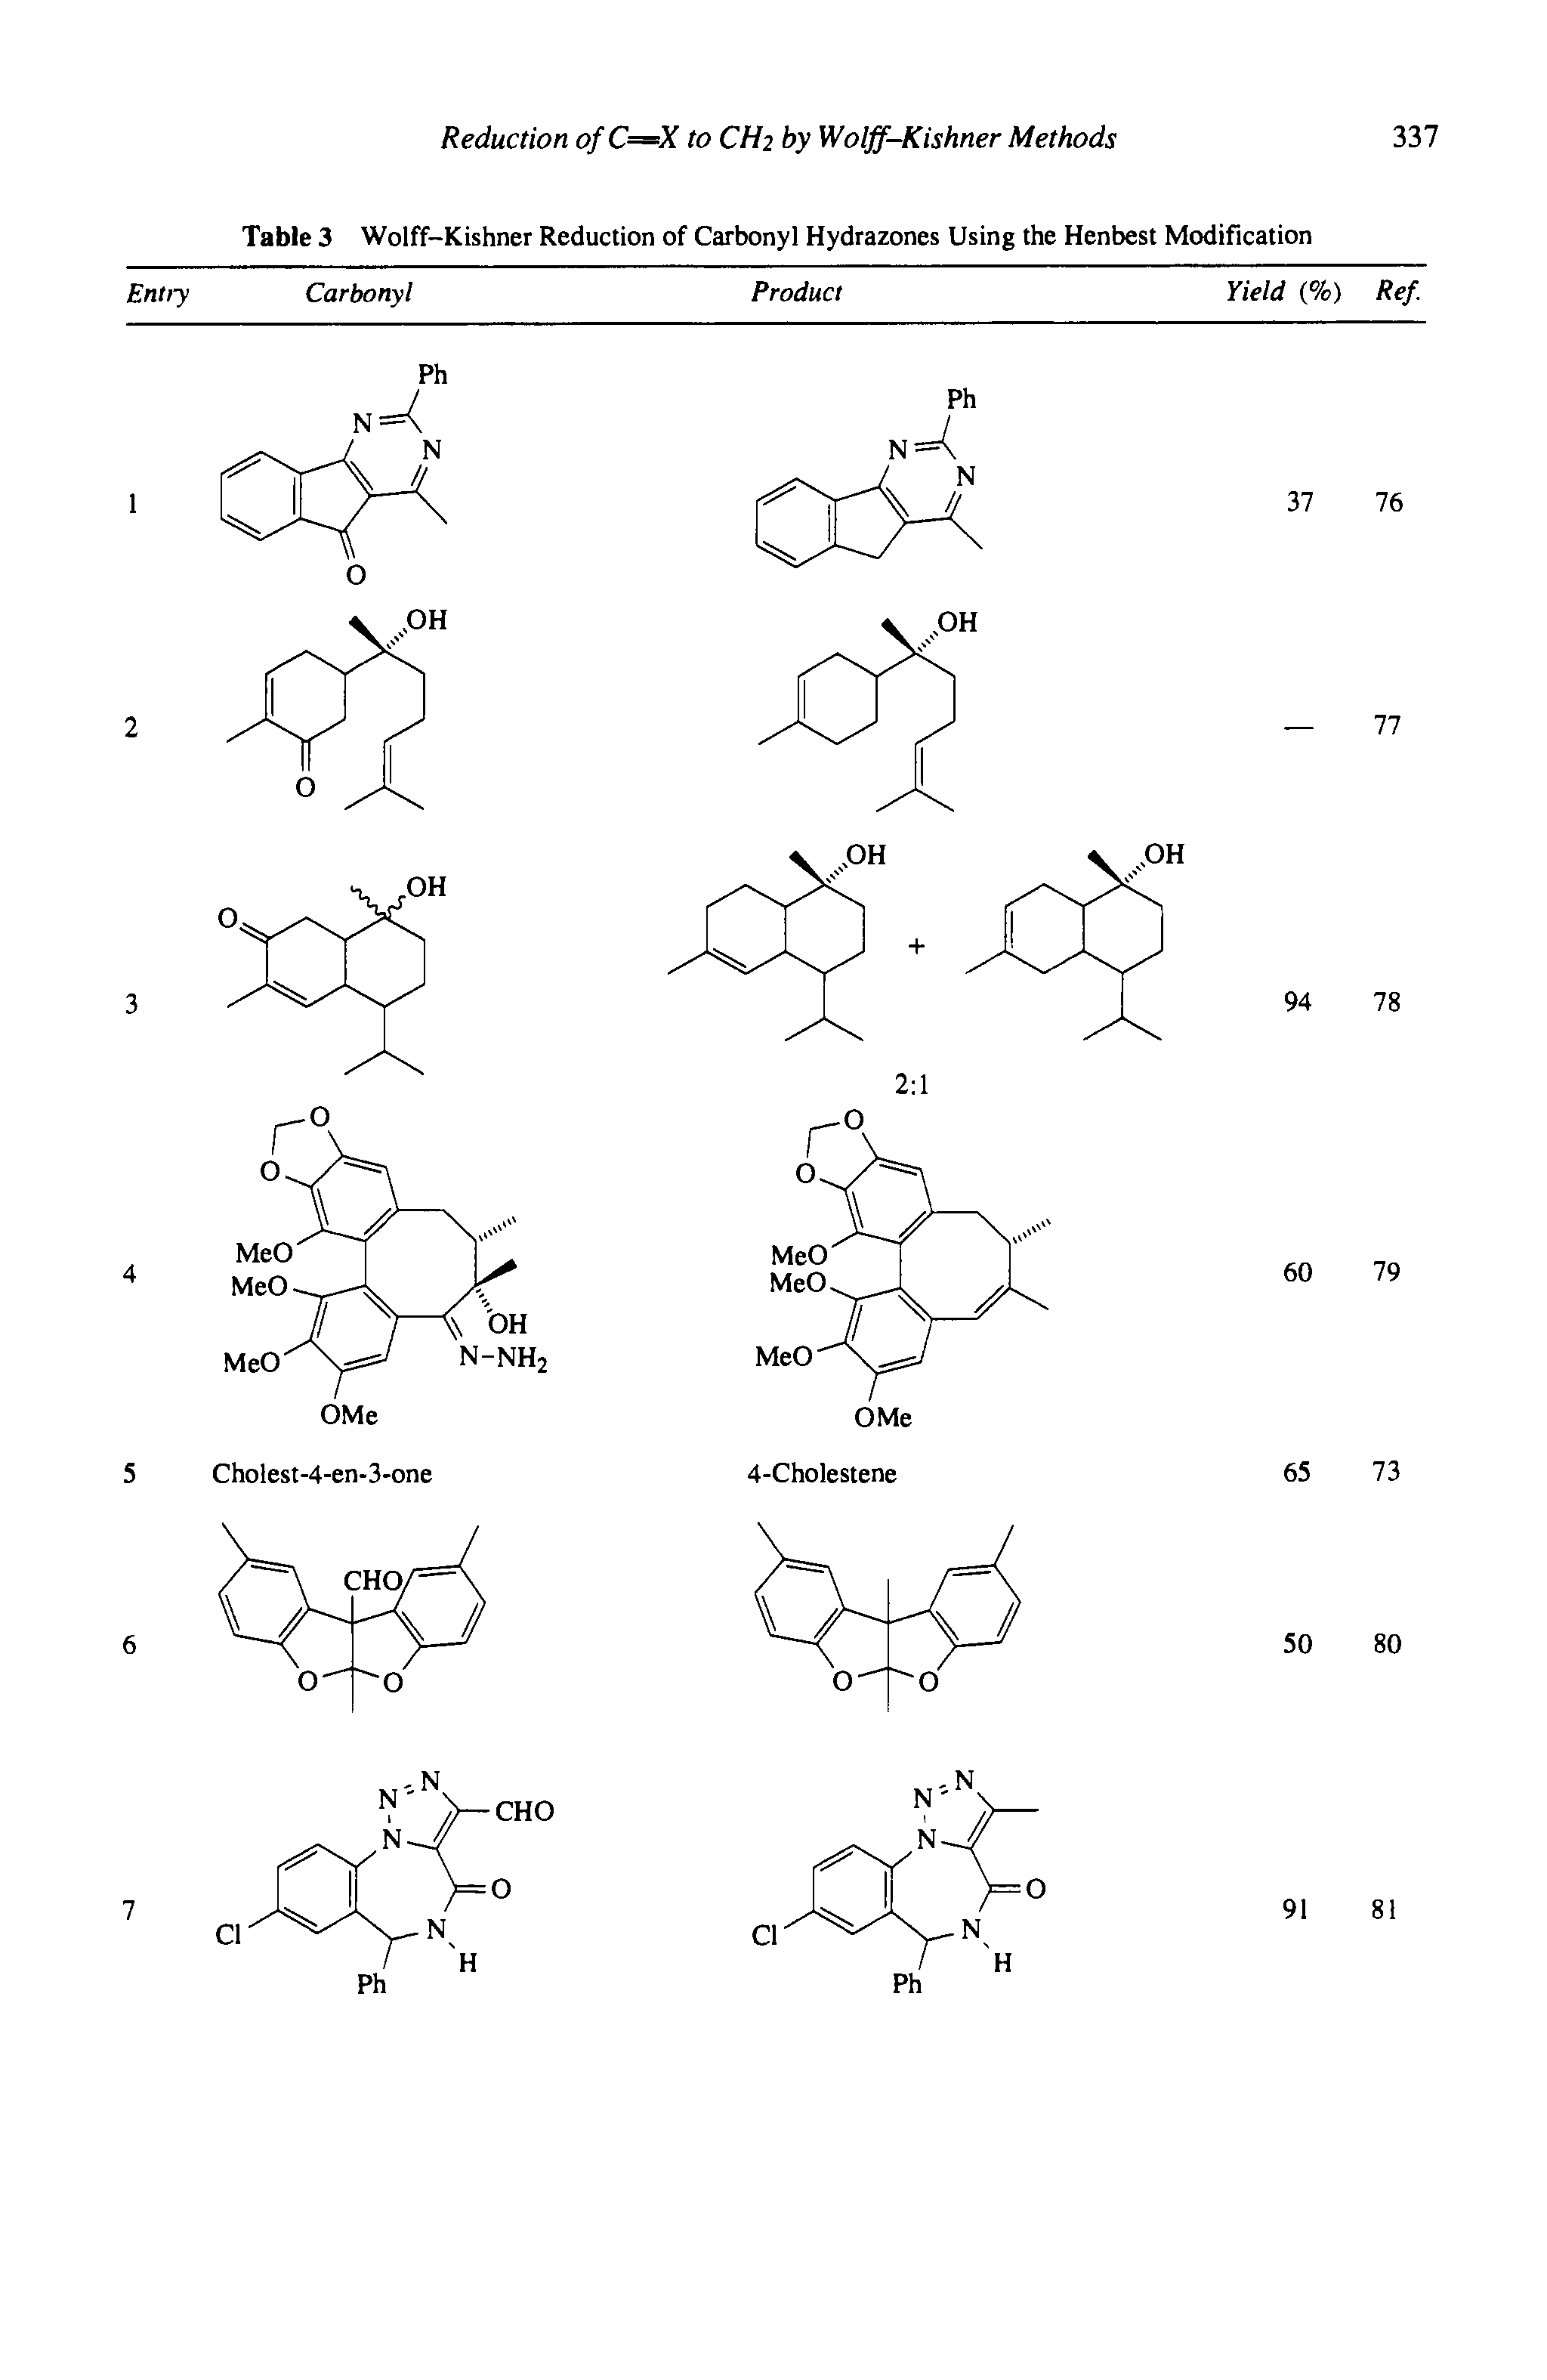 Table 3 Wolff-Kishner Reduction of Carbonyl Hydrazones Using the Henbest Modification...